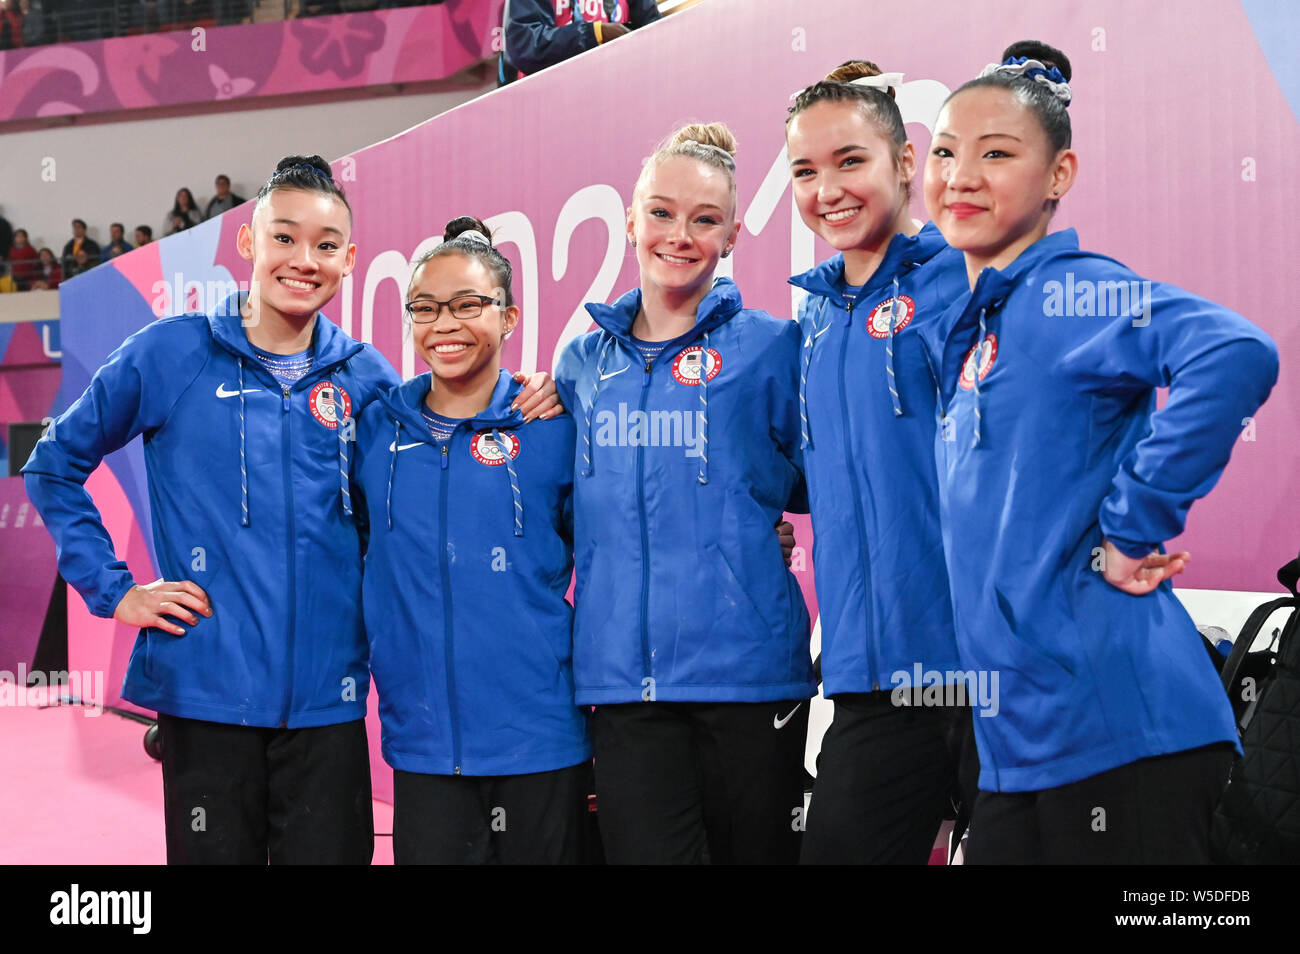 July 27, 2019, Lima, Peru: LEANNE WONG, MORGAN HURD, RILEY MCCUSKER, ALEAH FINNEGAN, and KARA EAKER pose for a photo after winning the team finals competition held in the Polideportivo Villa El Salvador  in Lima, Peru. (Credit Image: © Amy Sanderson/ZUMA Wire) Stock Photo